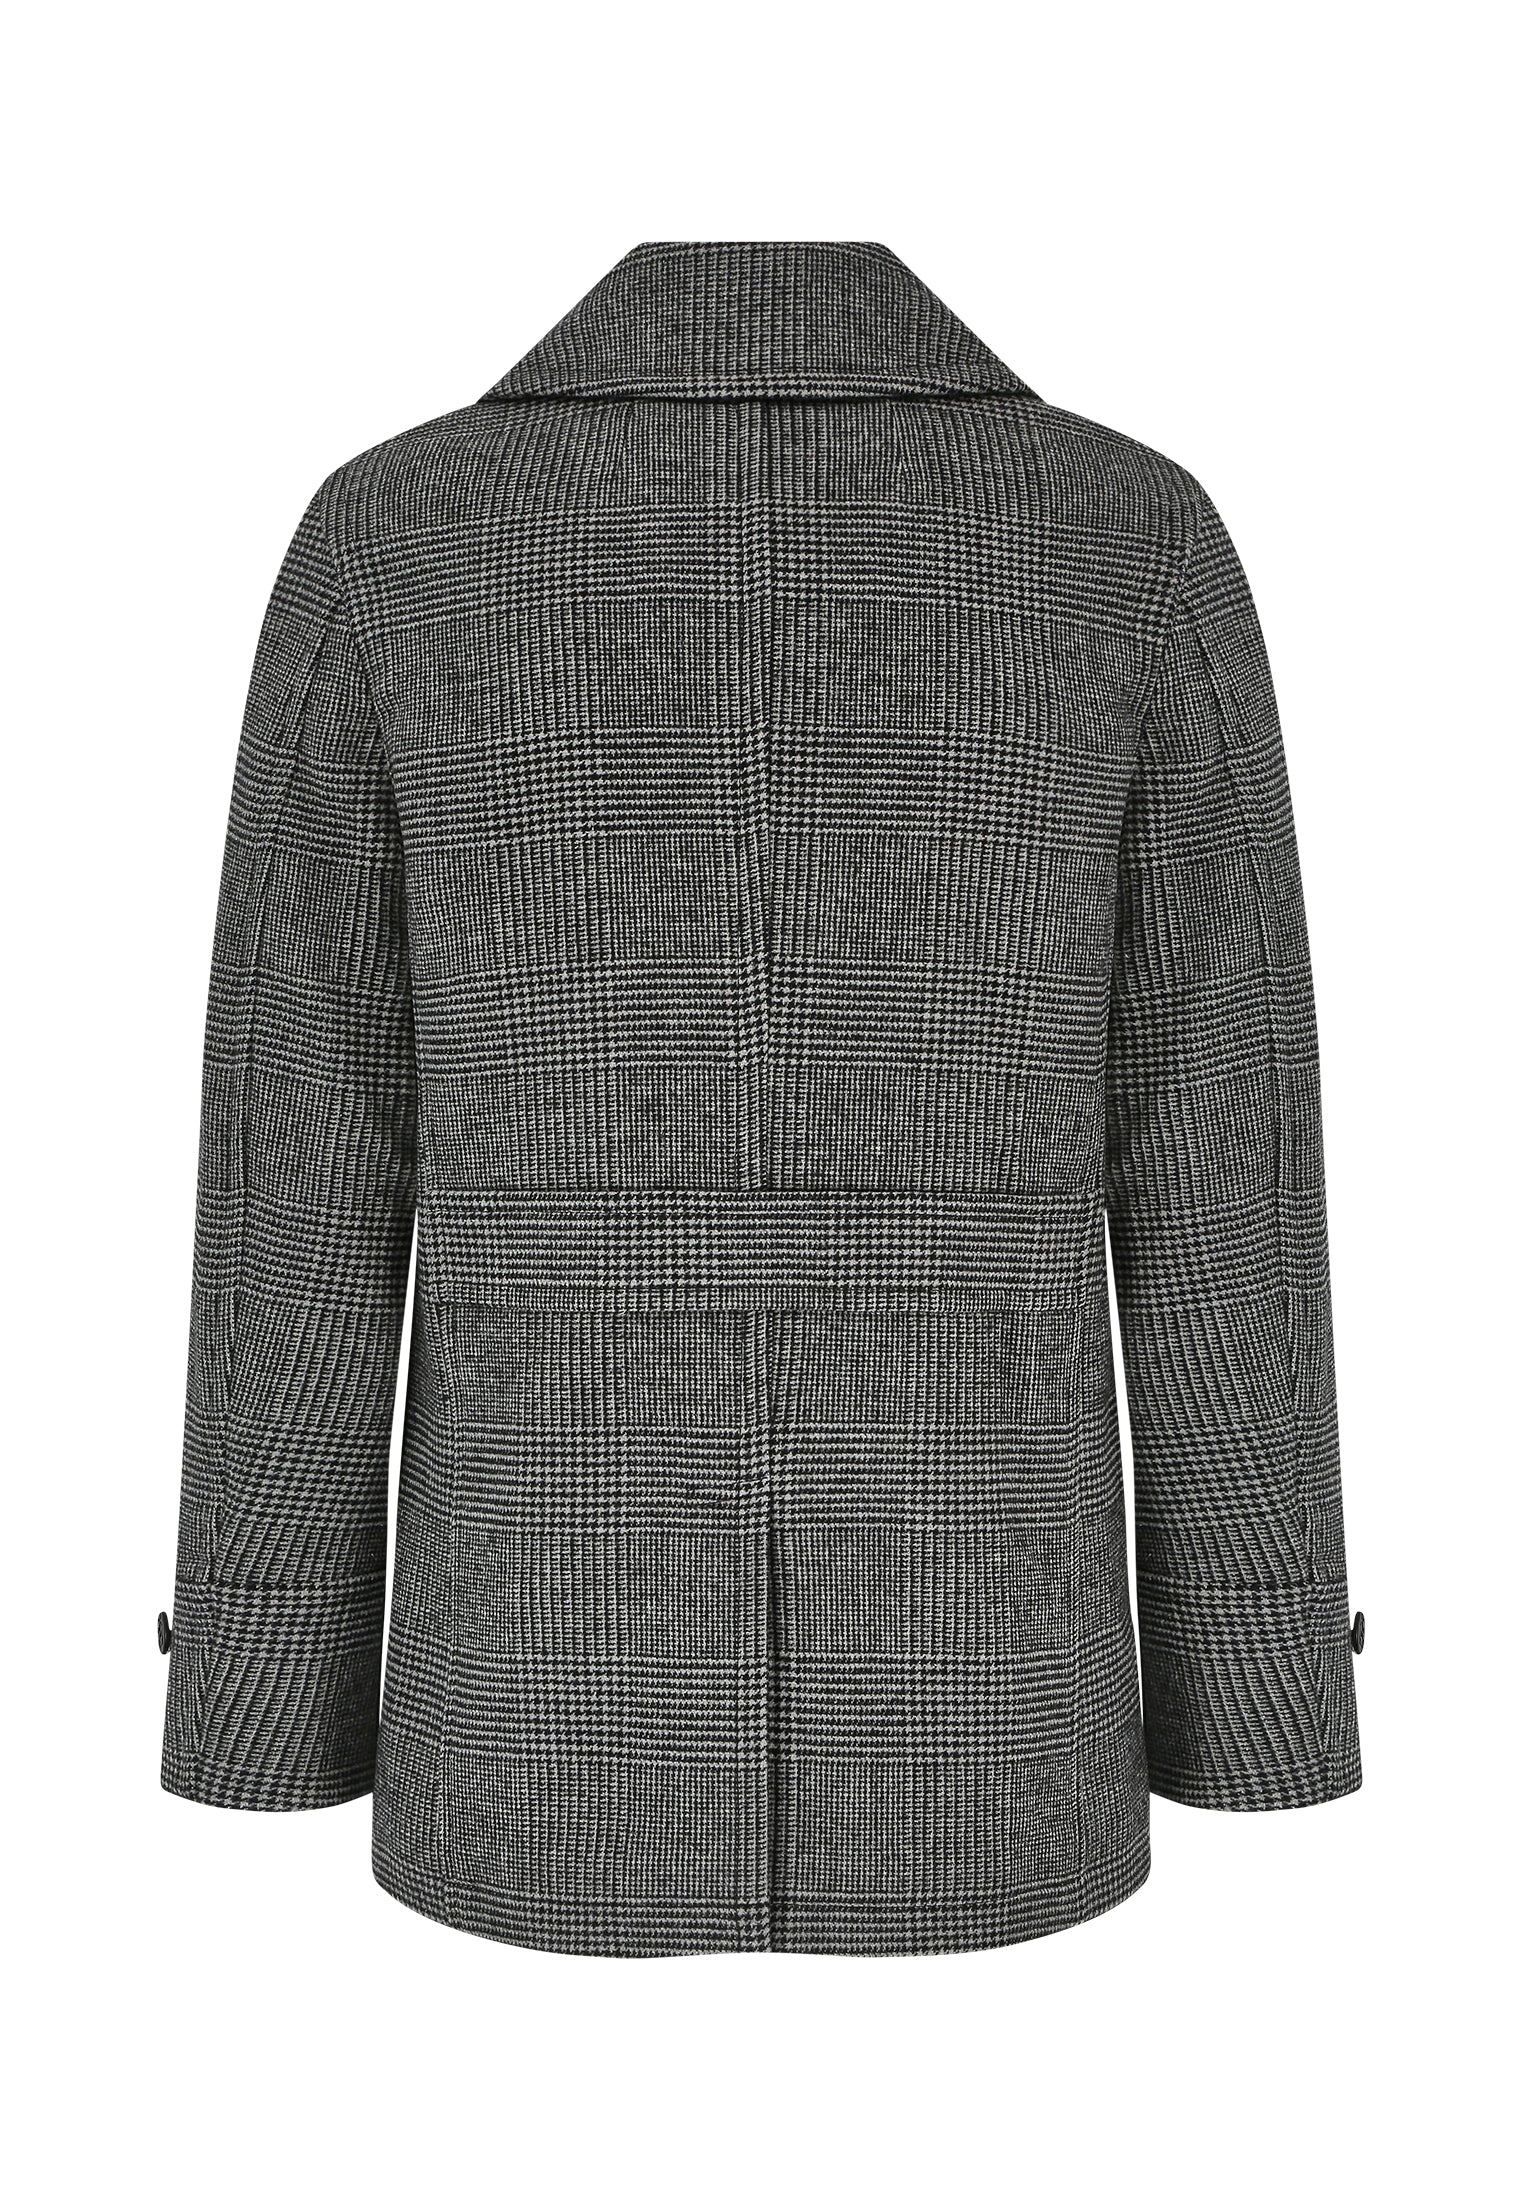 Prince of Wales Peacoat Back by Merc London